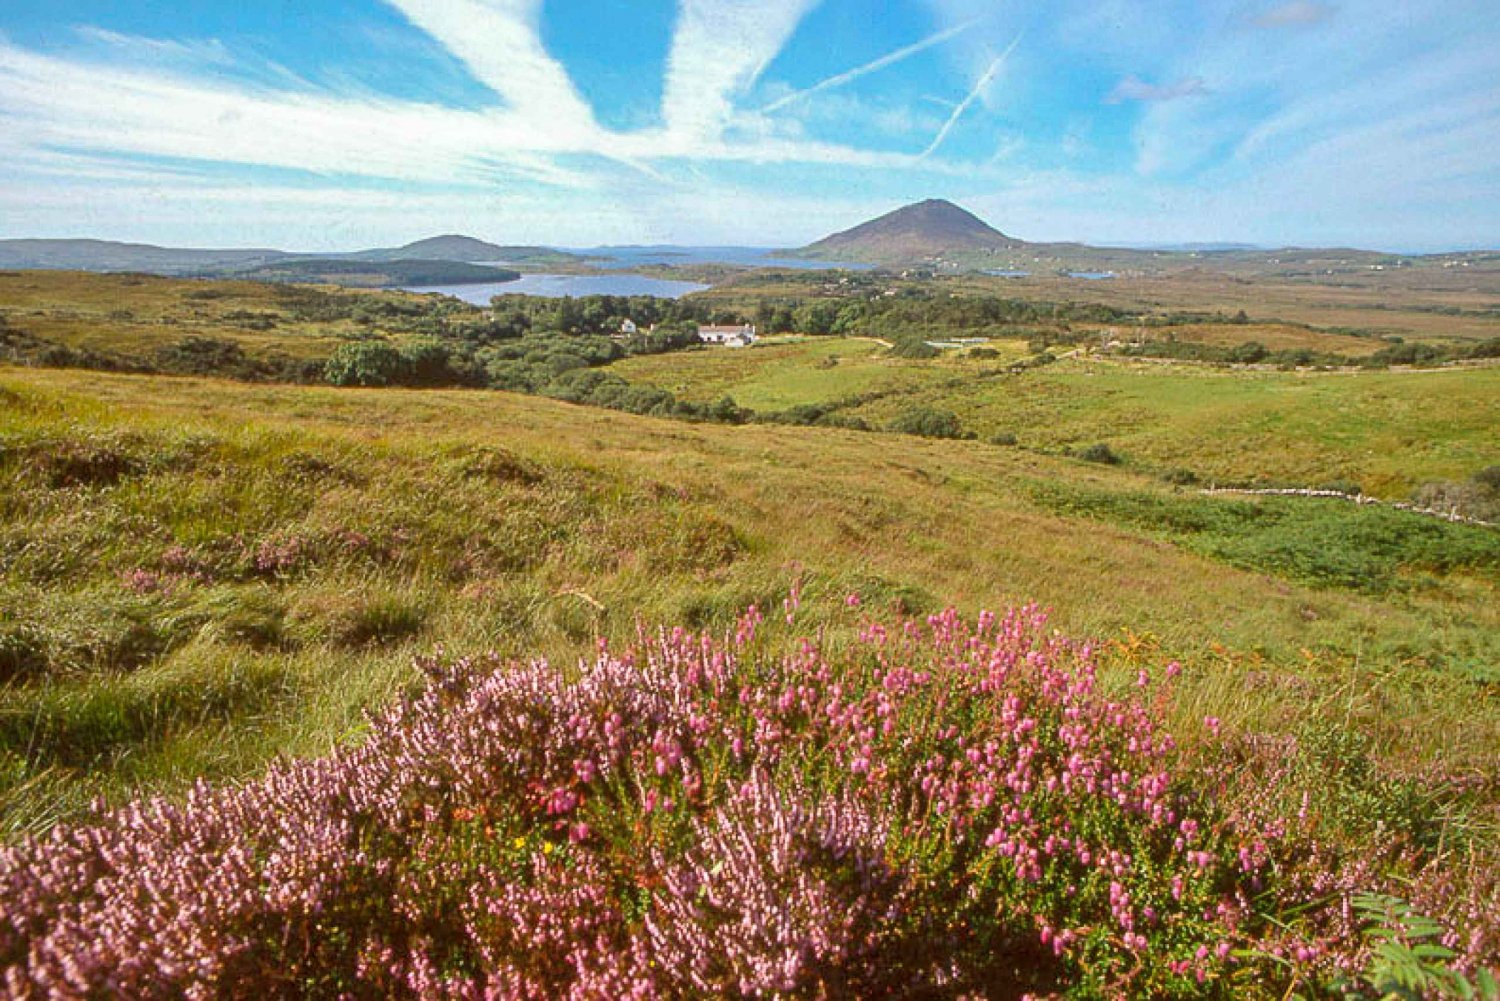 Full-Day Tour to Connemara/Cong from Dublin